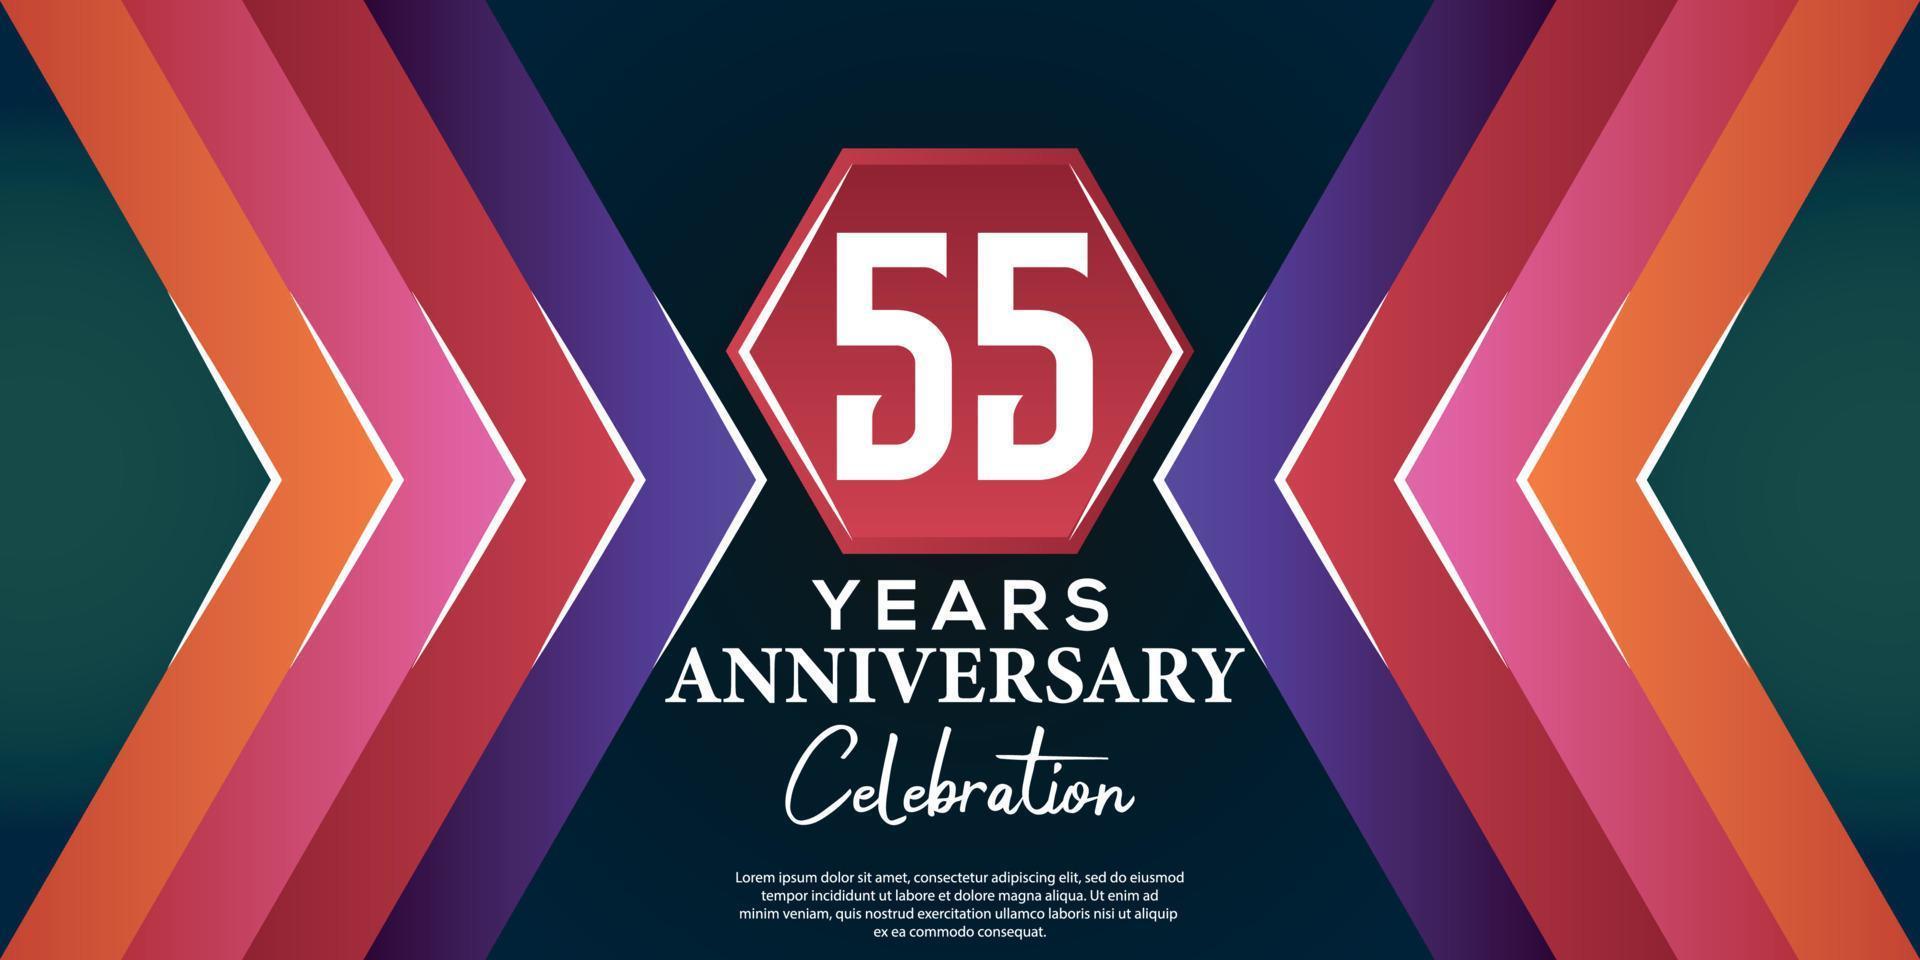 55 year anniversary celebration design with luxury abstract color style on luxury black backgroun vector